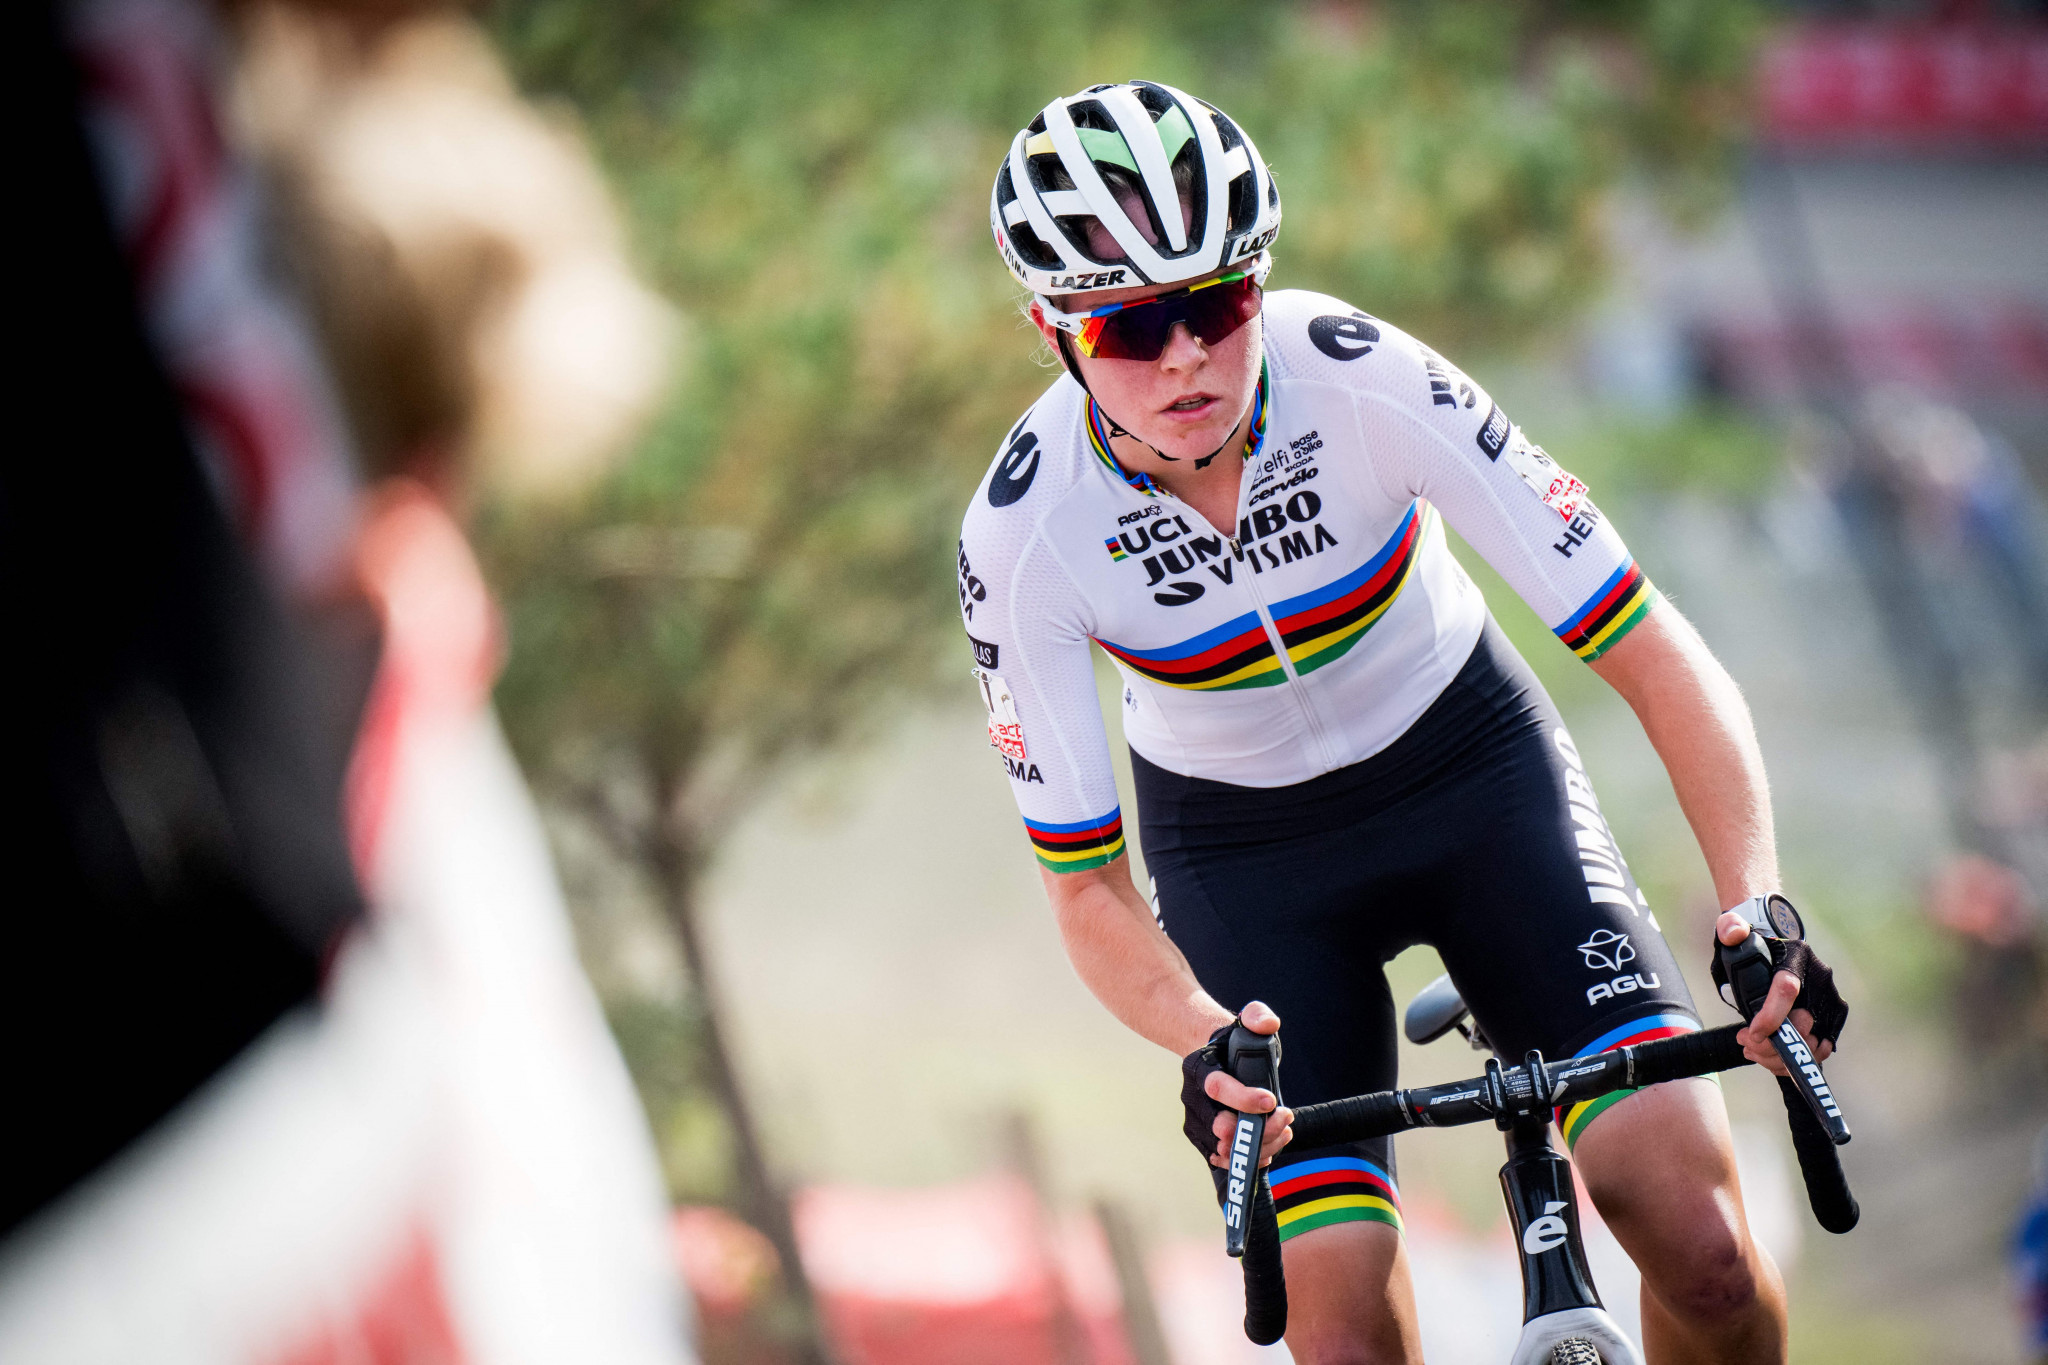 Reigning champion Van Empel starts in style at UCI Cyclo-Cross World Cup